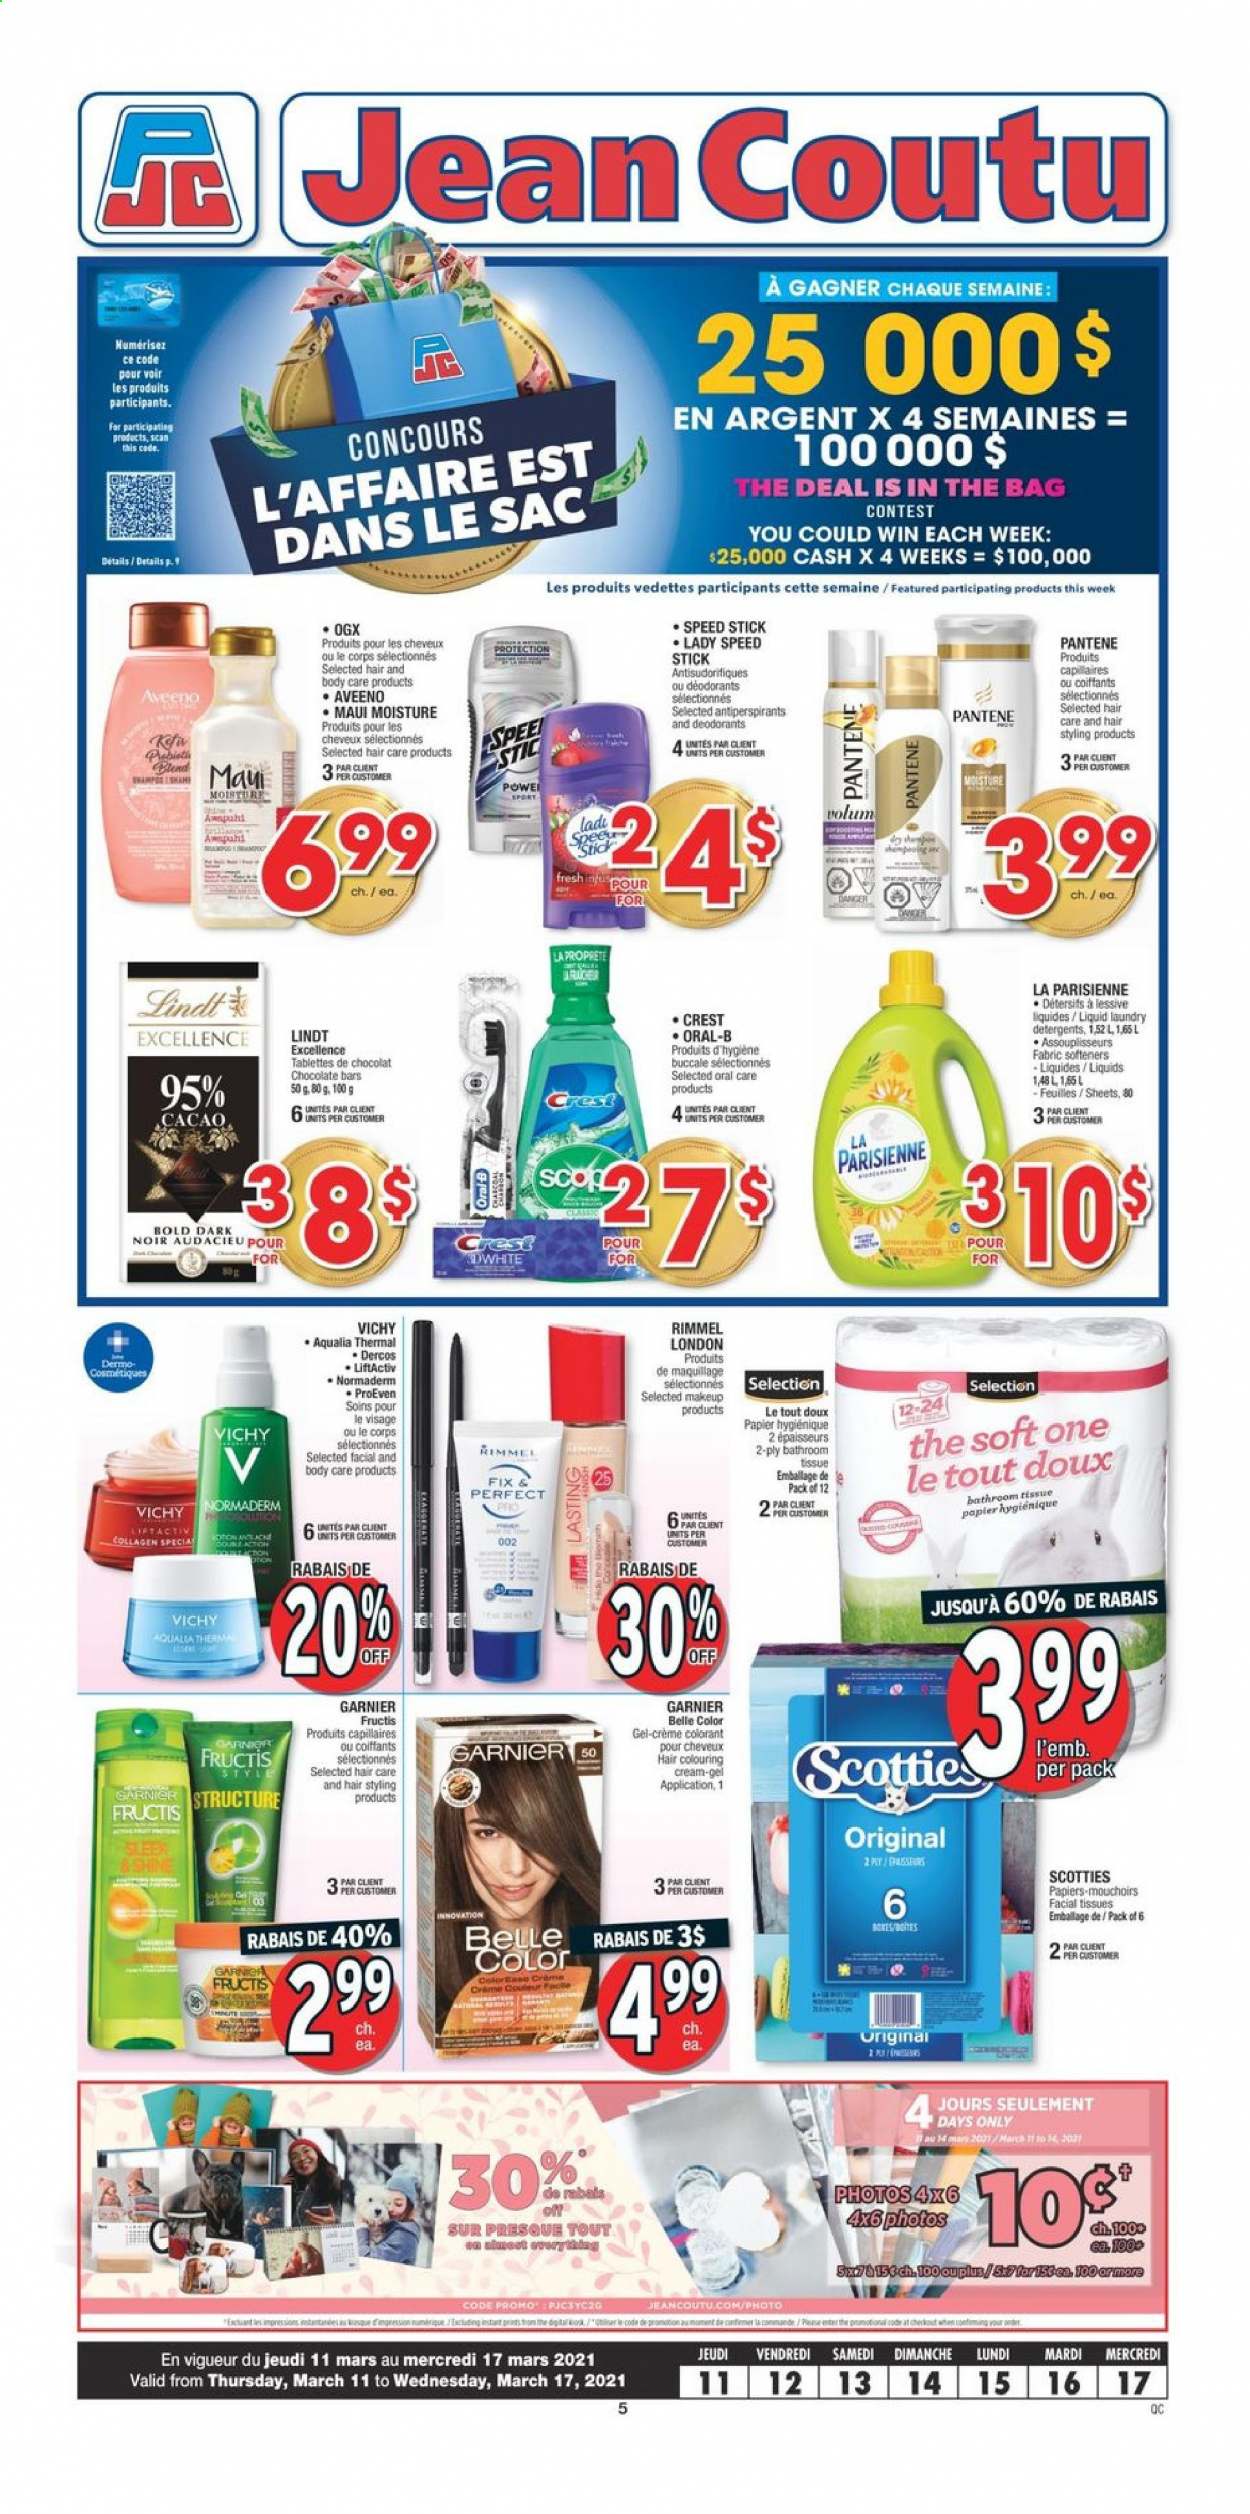 thumbnail - Jean Coutu Flyer - March 11, 2021 - March 17, 2021 - Sales products - Mars, chocolate bar, Aveeno, bath tissue, Vichy, Crest, facial tissues, OGX, Maui Moisture, Fructis, Speed Stick, makeup, Rimmel, Garnier, Pantene, Oral-B, deodorant. Page 1.